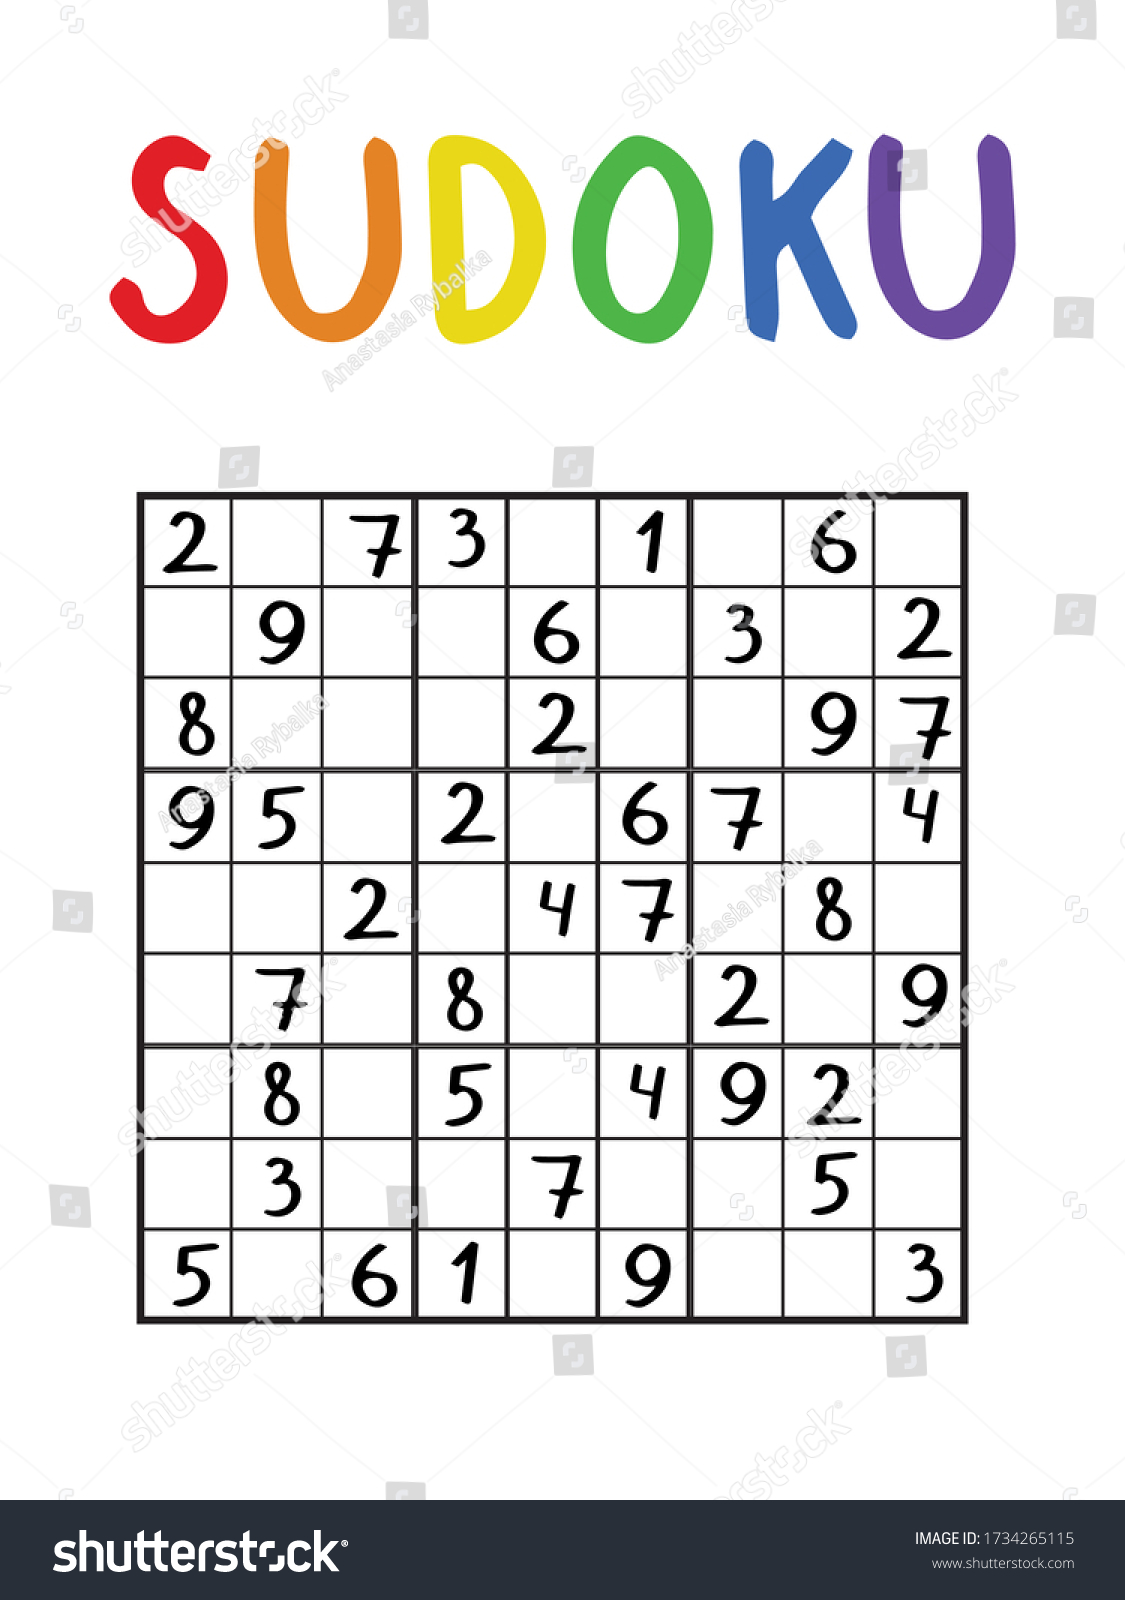 SVG of Classical sudoku game stock vector illustration. Nine by nine middle sudoku level puzzle without answers. Black and white logic number puzzle with colorful title. Sudoku stock vector illustration. svg